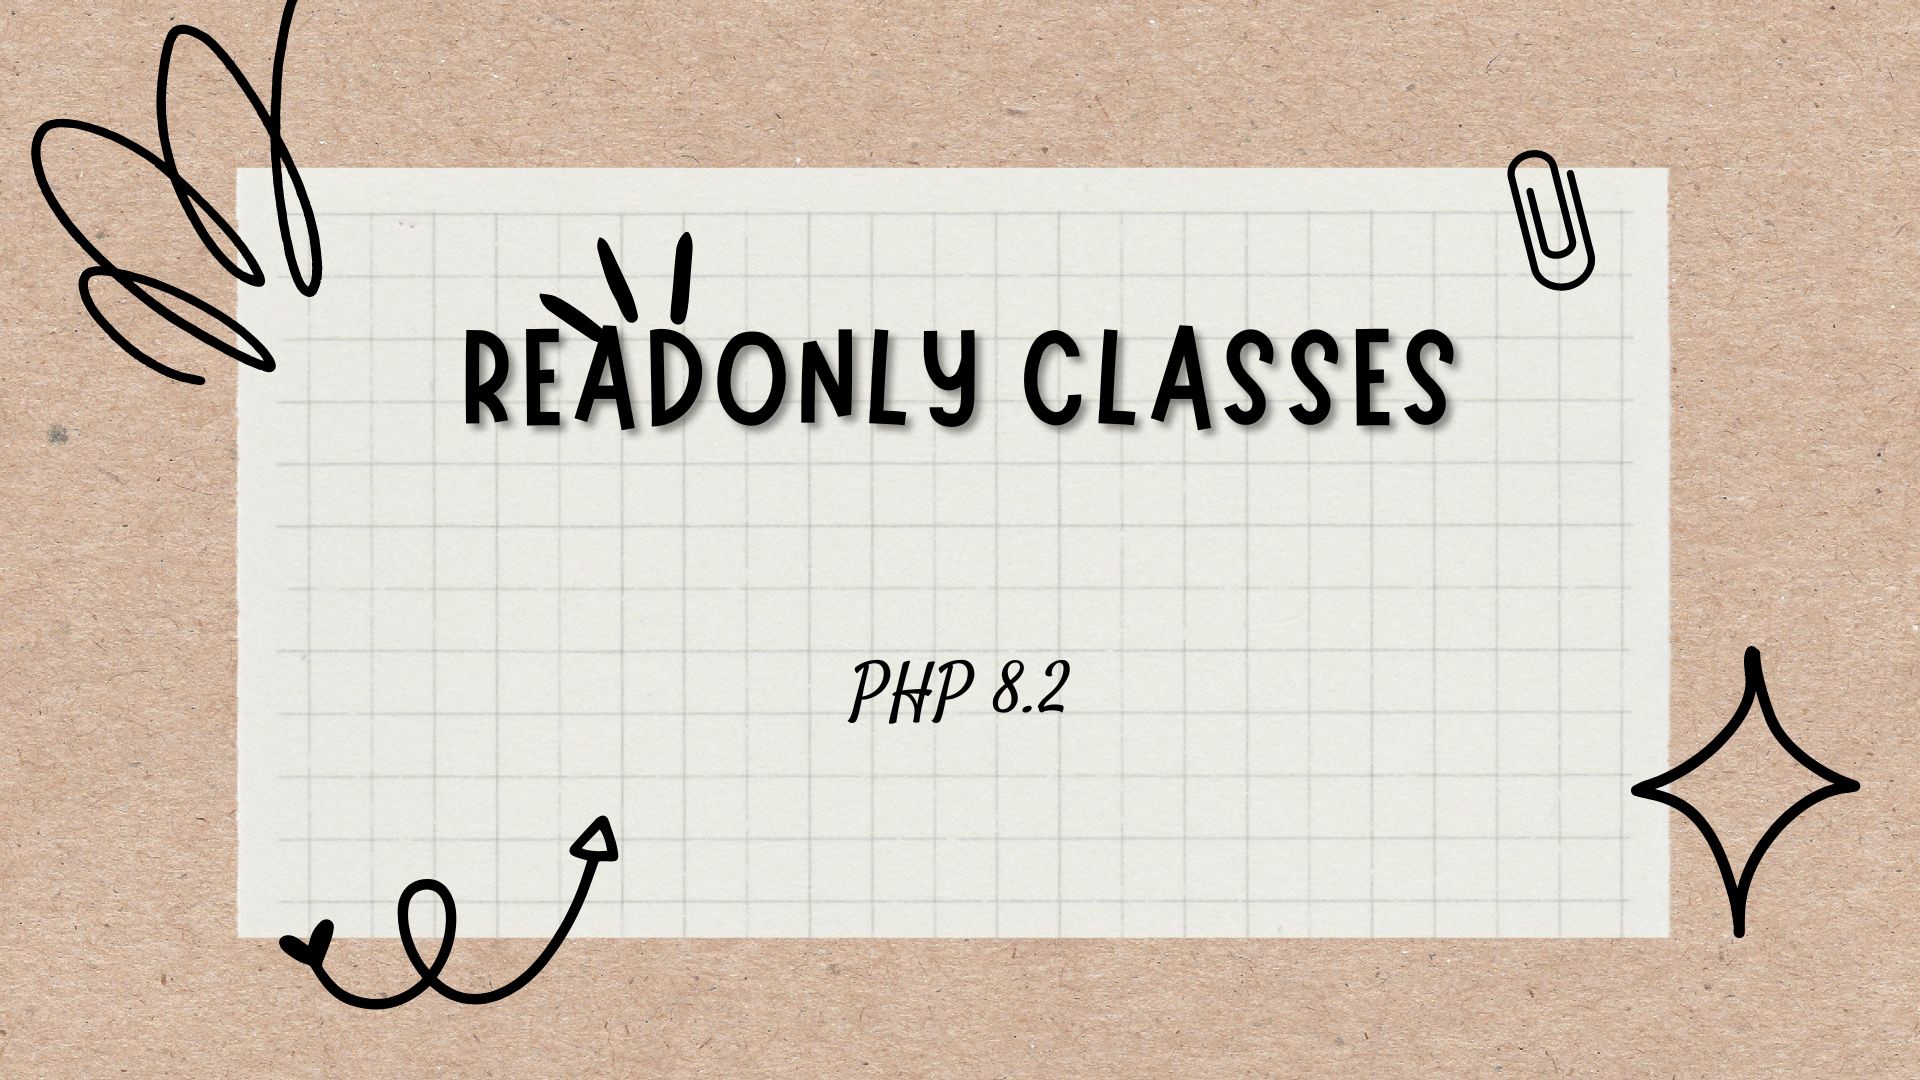 PHP 8.2: Readonly Classes